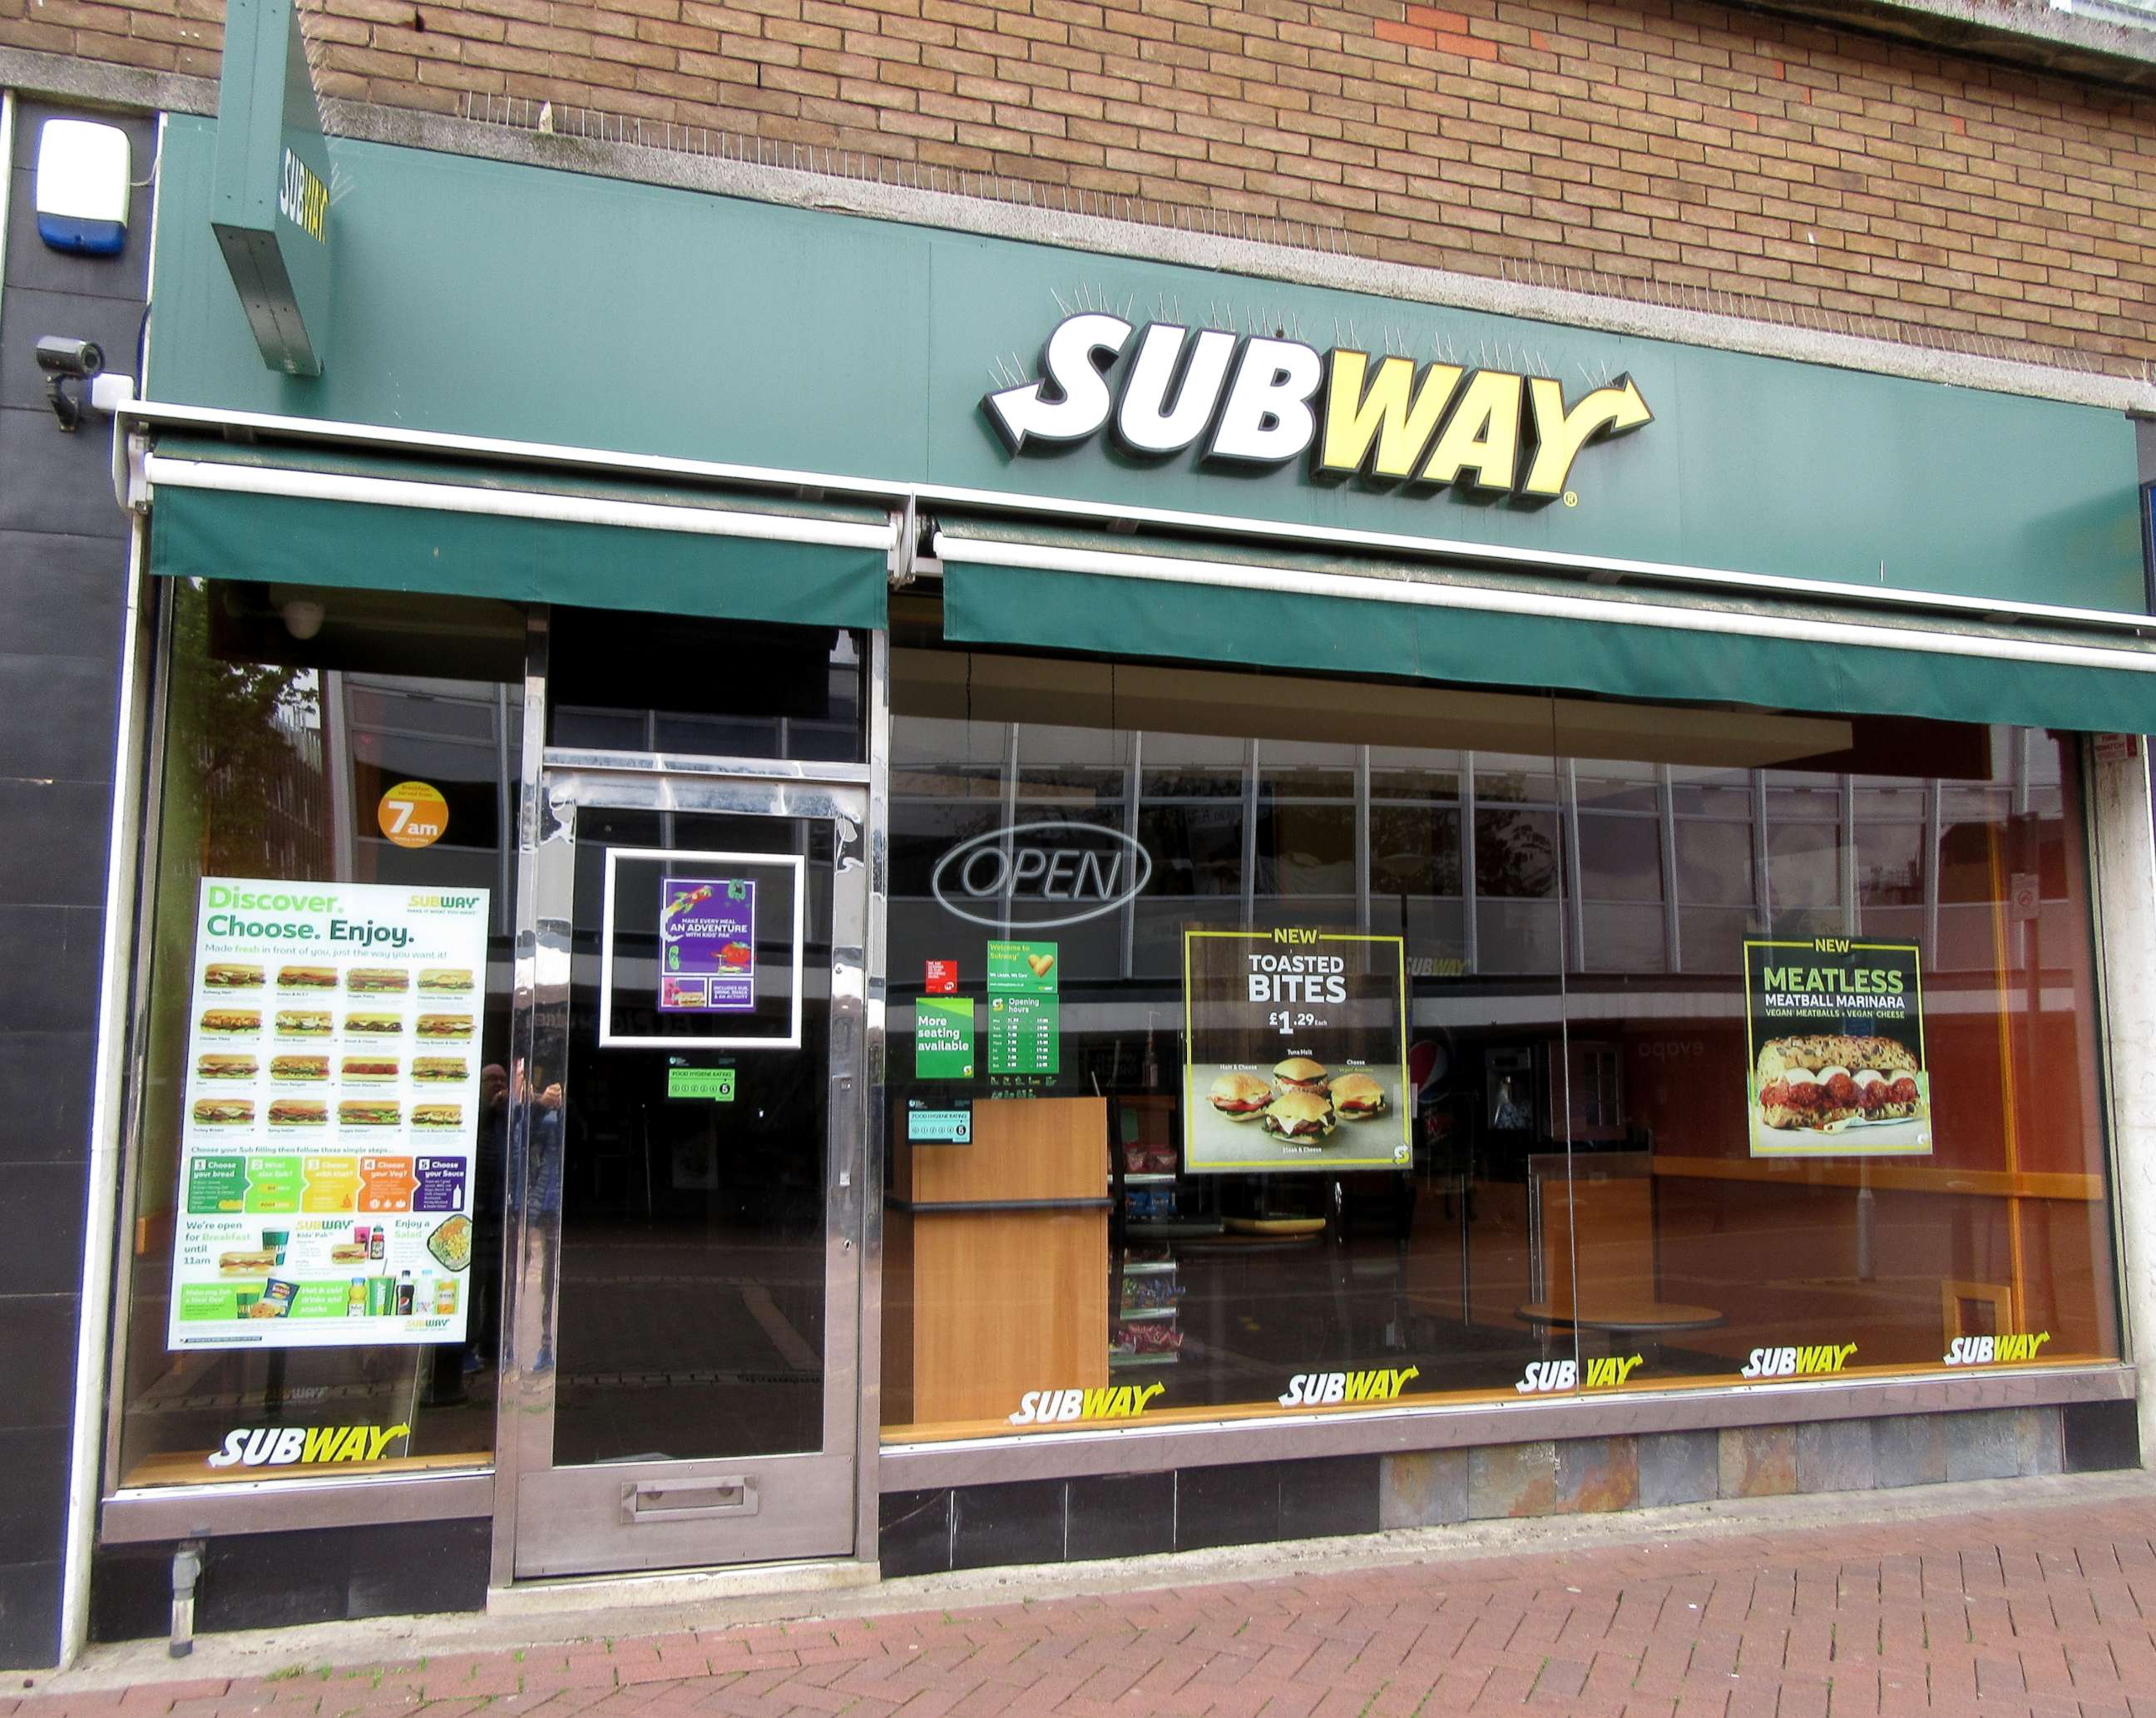 PHOTO: Ireland’s Supreme Court issued a ruling on Sept. 29, 2020 declaring that the bread served at Subway does not actually meet the legal definition of “bread” because of its sugar content.